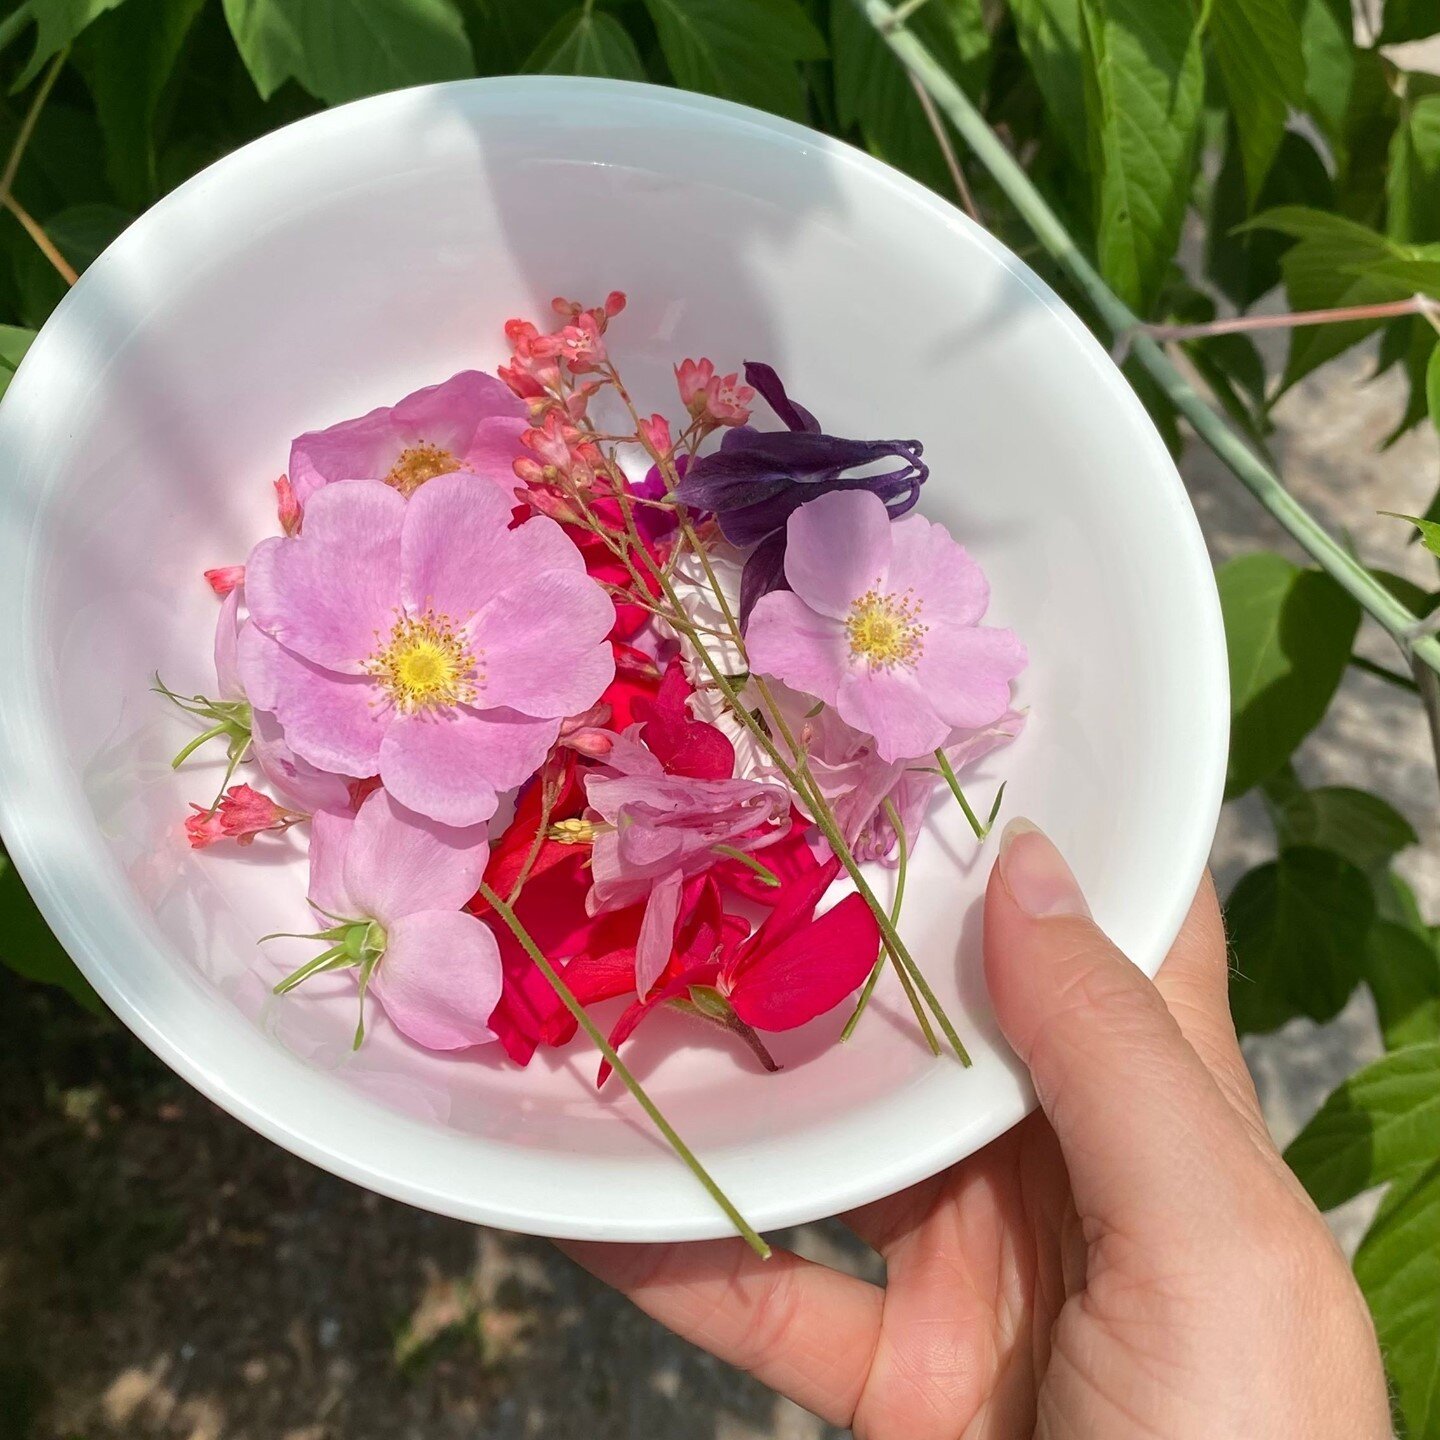 🌸🌼🌷 Picking flowers to press is so relaxing. ⁣
⁣
I love going for walks and looking for wildflowers, or gardens so robust with flowers that if one or two went missing, no one would even notice 😁⁣
⁣
Flowers come and go way too quickly, I try to do